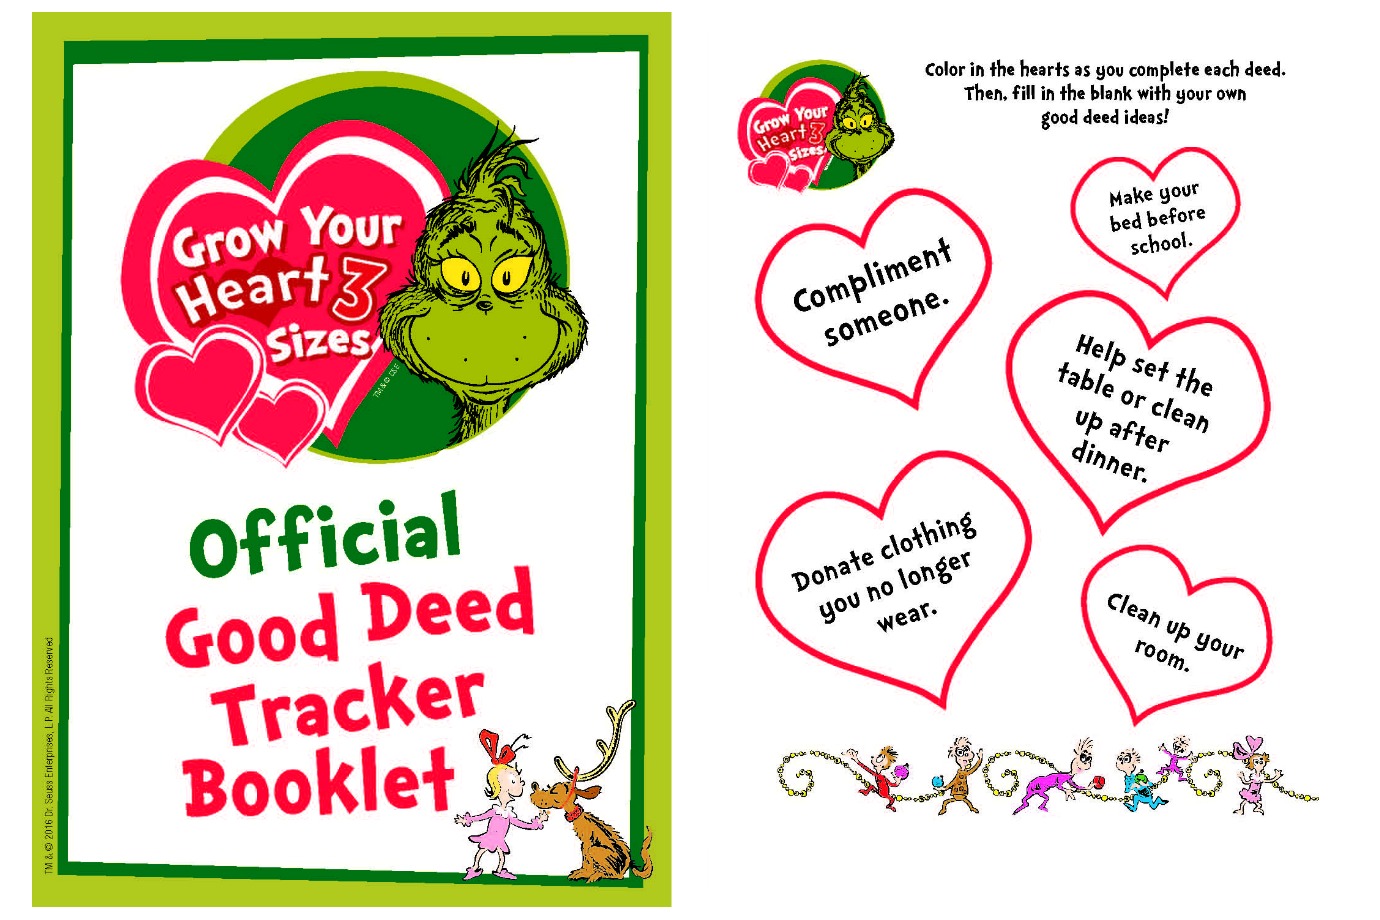 Free printables + activities that help grow kids’ hearts 3 sizes this Grinch-mas